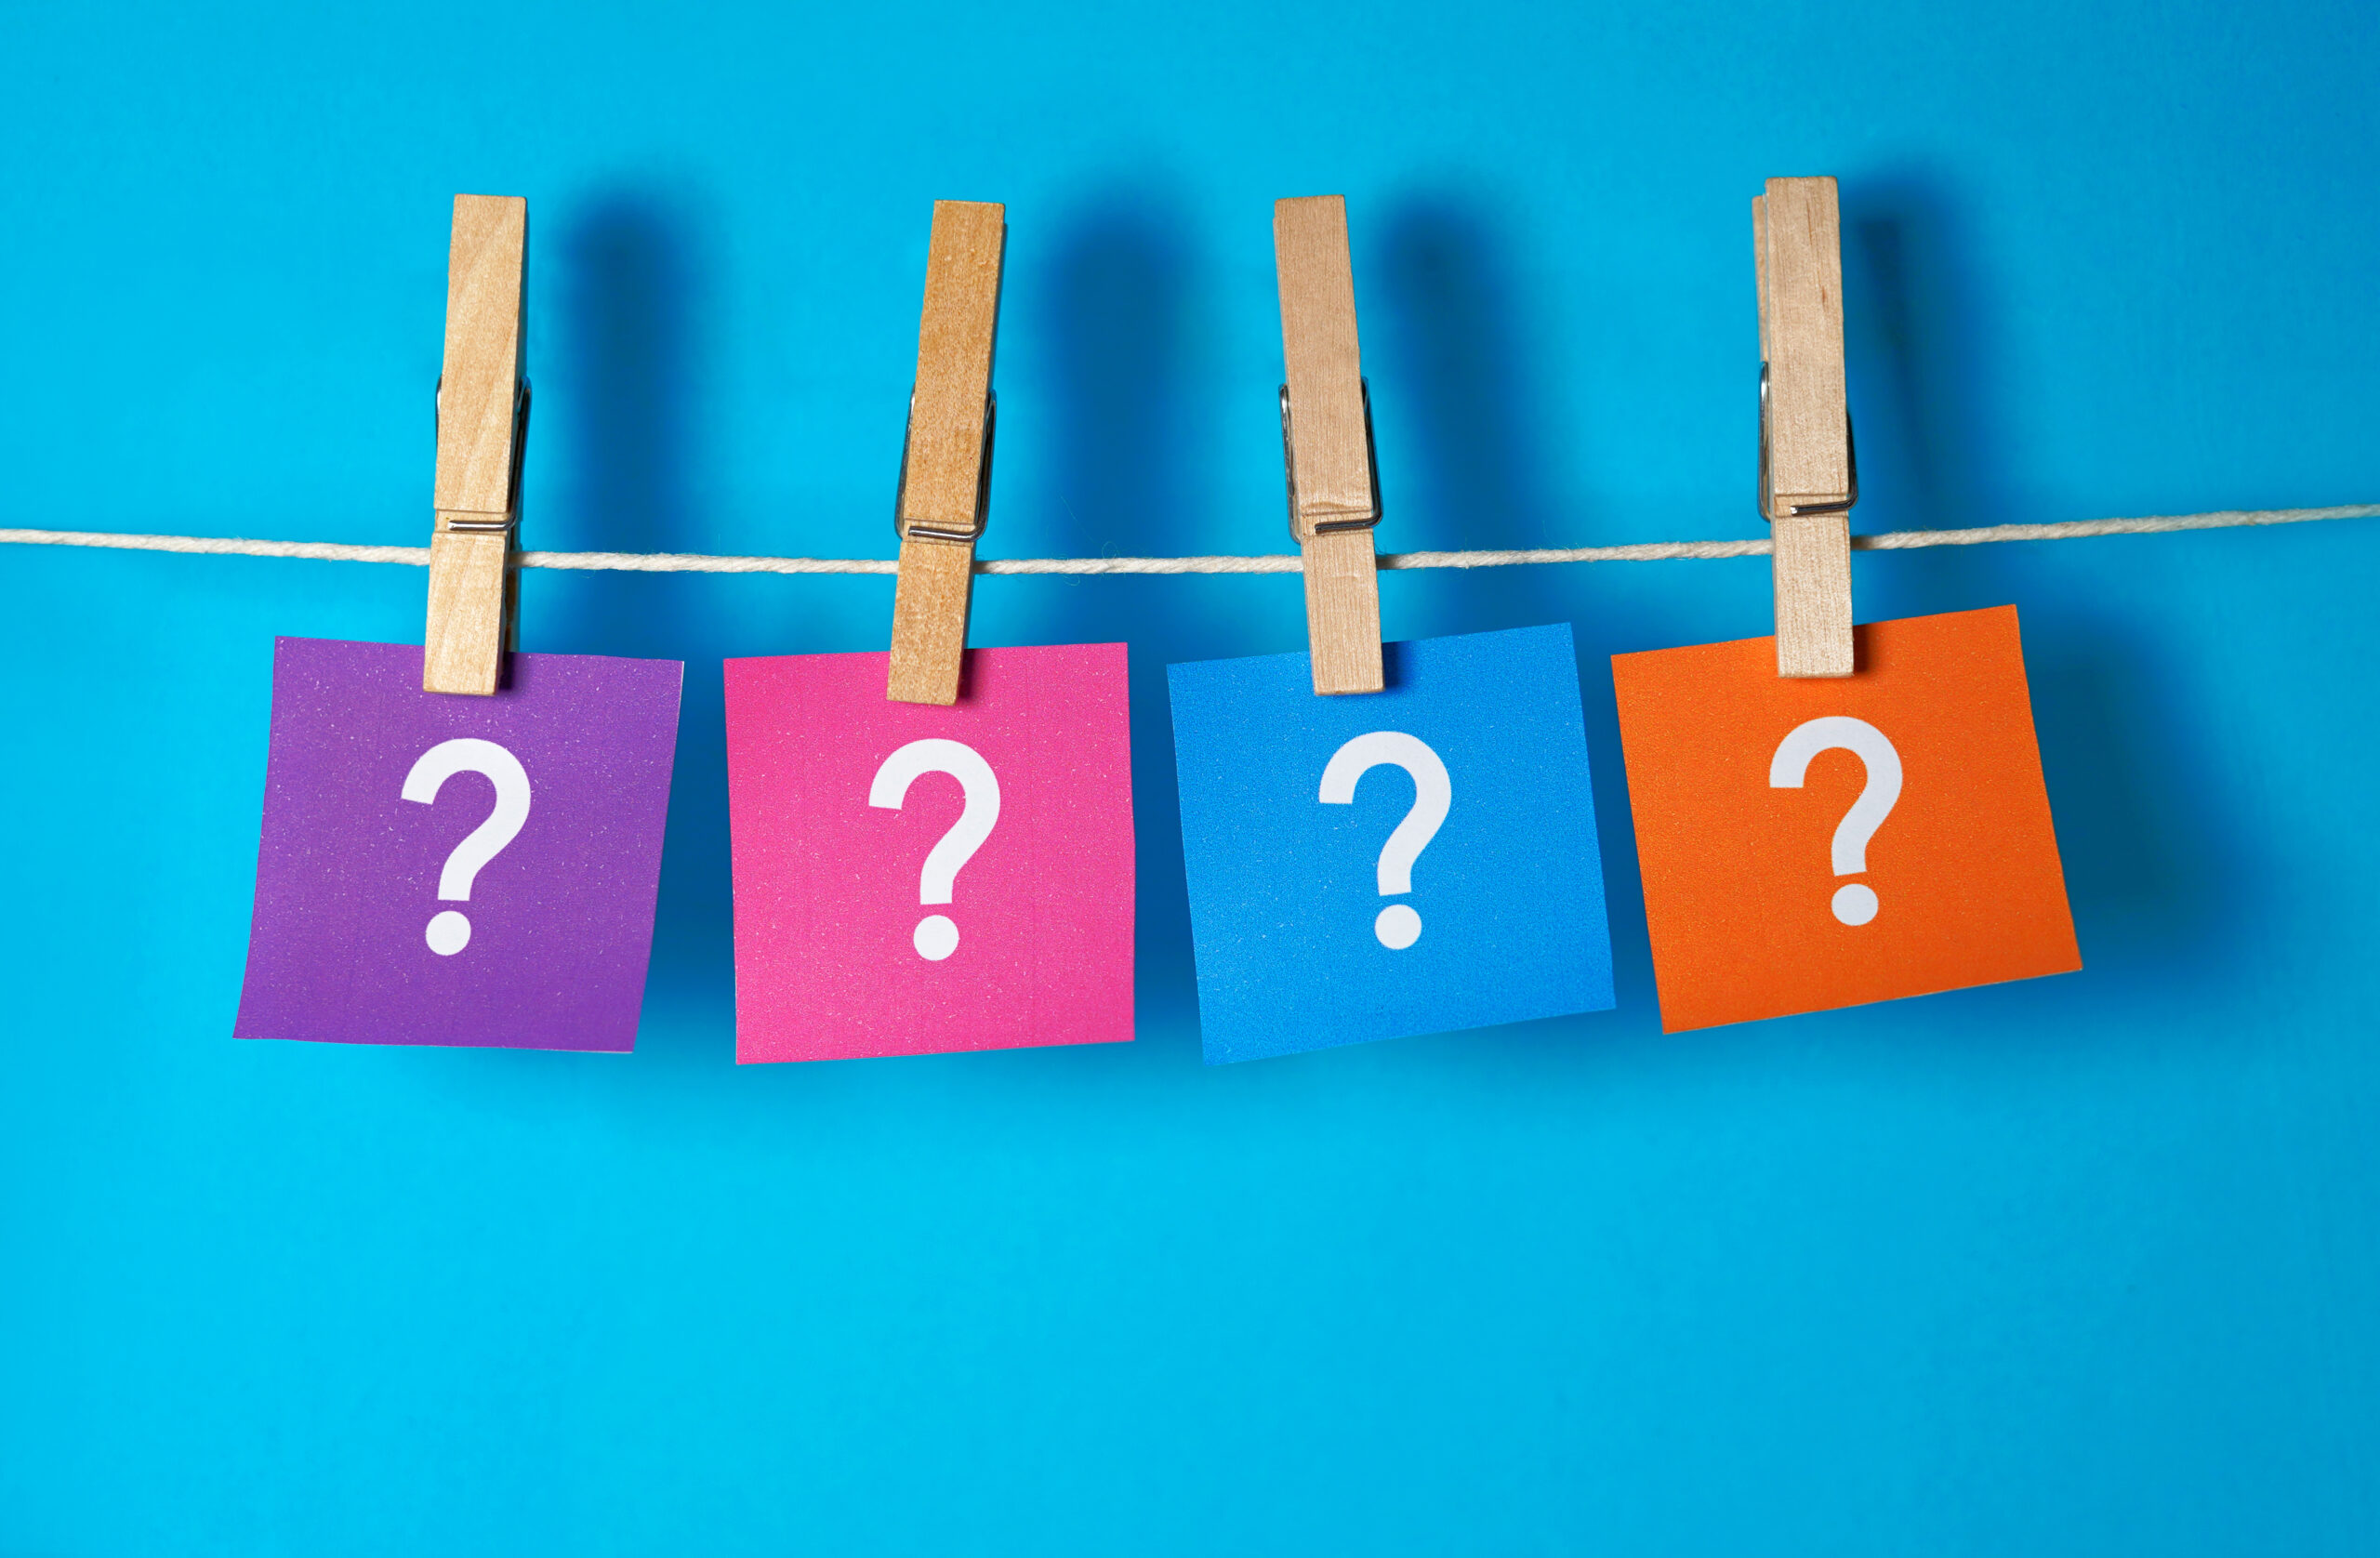 Four different colored post-it notes with a question mark on them are clipped to a string using a clothespin.